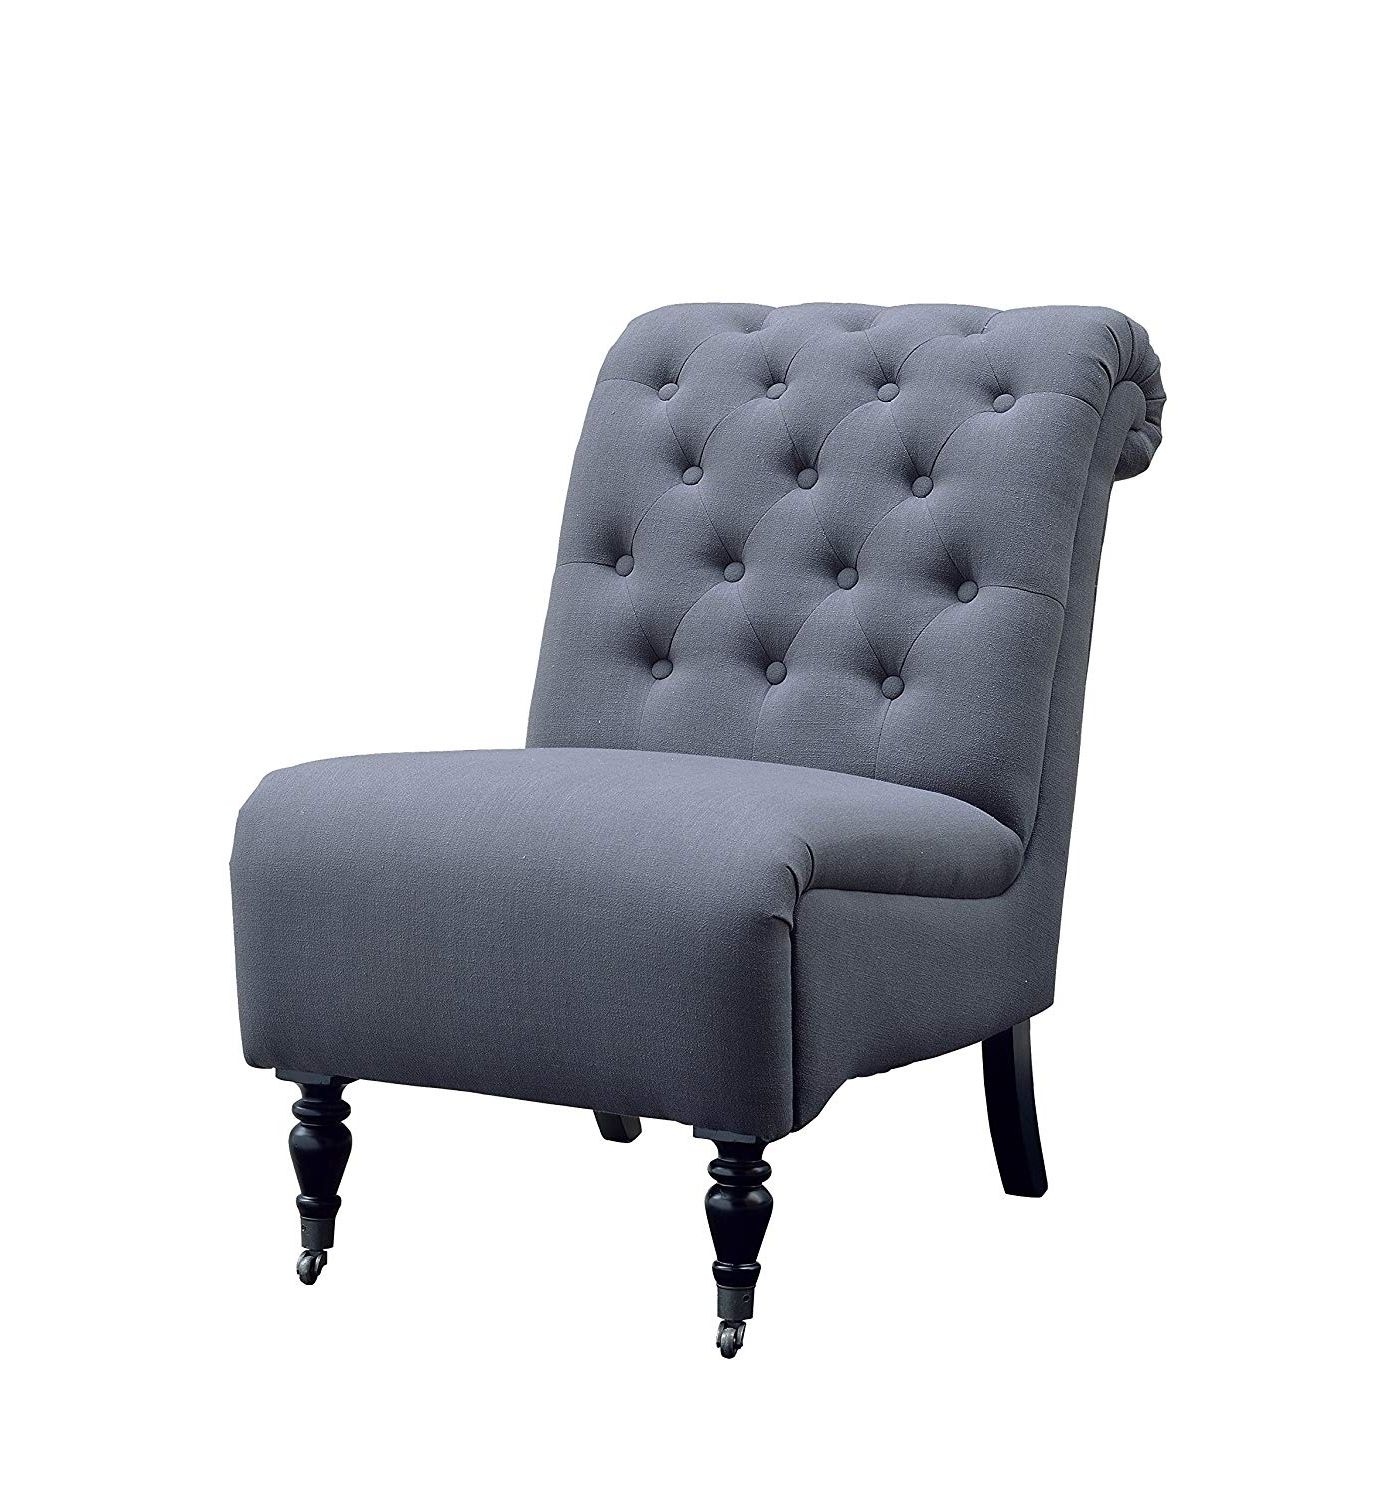 Cora Ii Arm Chairs With Regard To Well Liked Amazon: Linon Cora Charcoal Roll Back Tufted Chair: Kitchen & Dining (Photo 8 of 20)